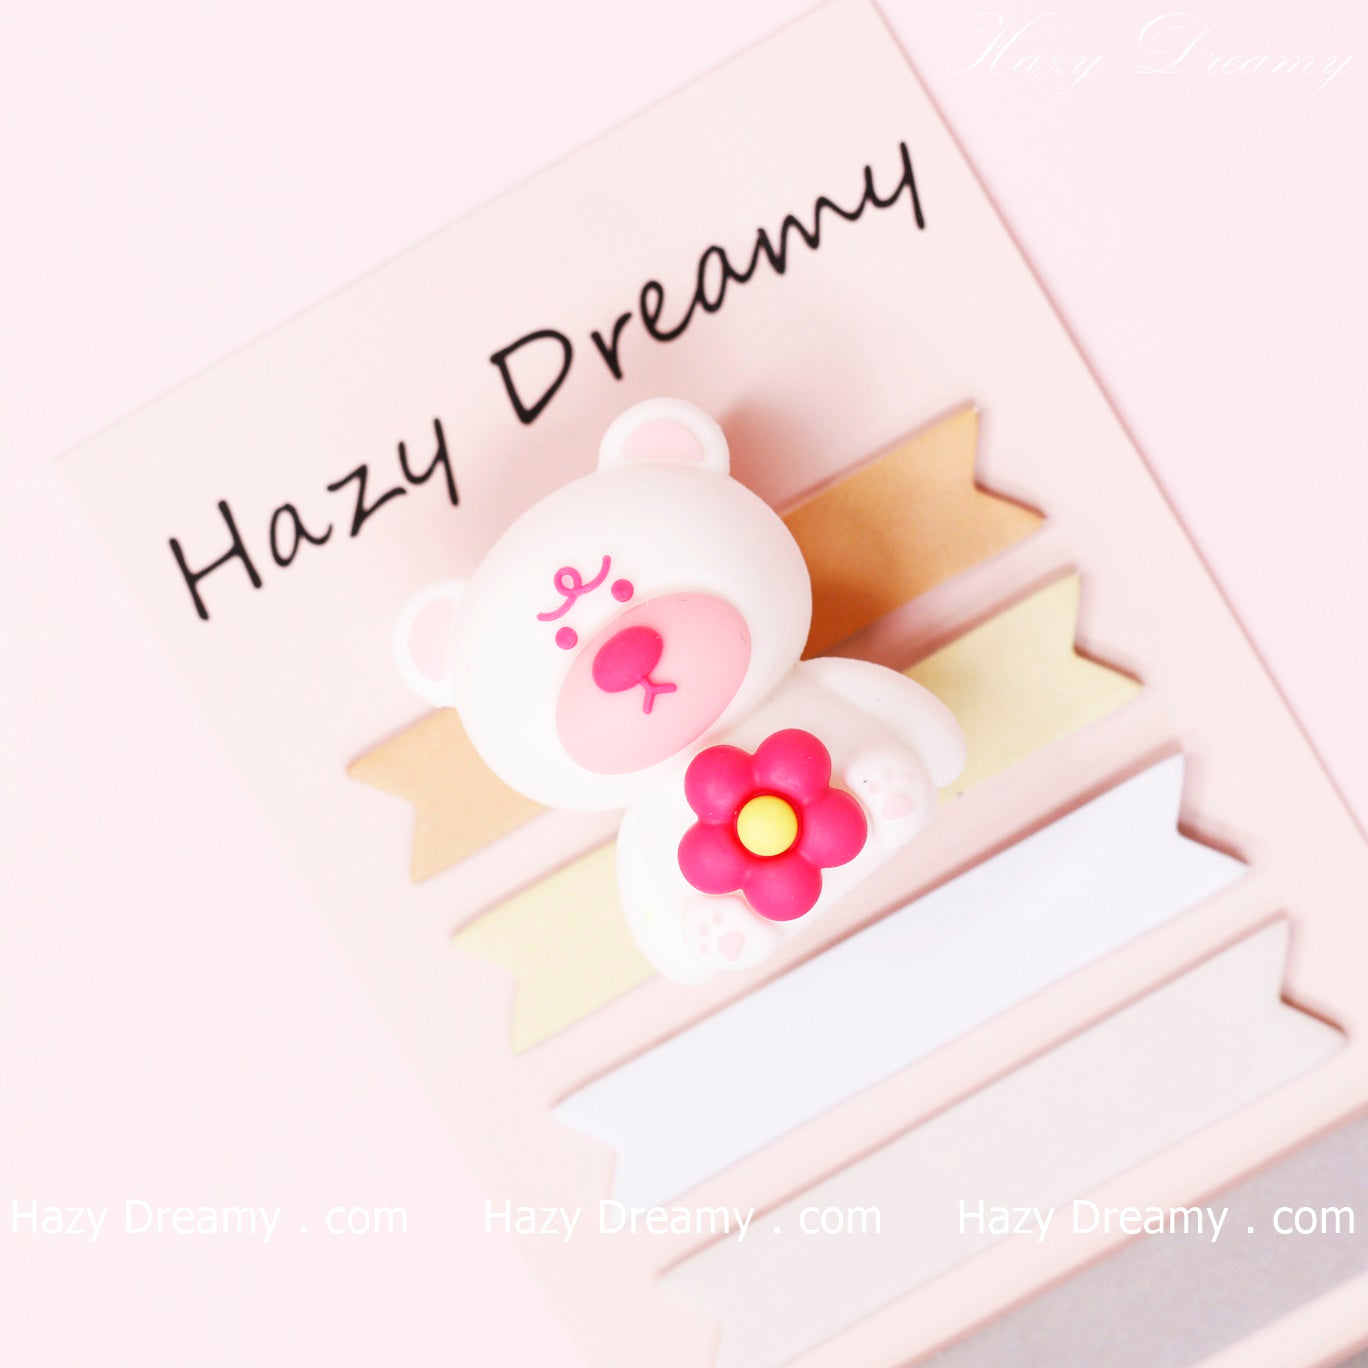 Charming White Bear 3D Eraser - Ideal for Kids and Stationery Enthusiasts